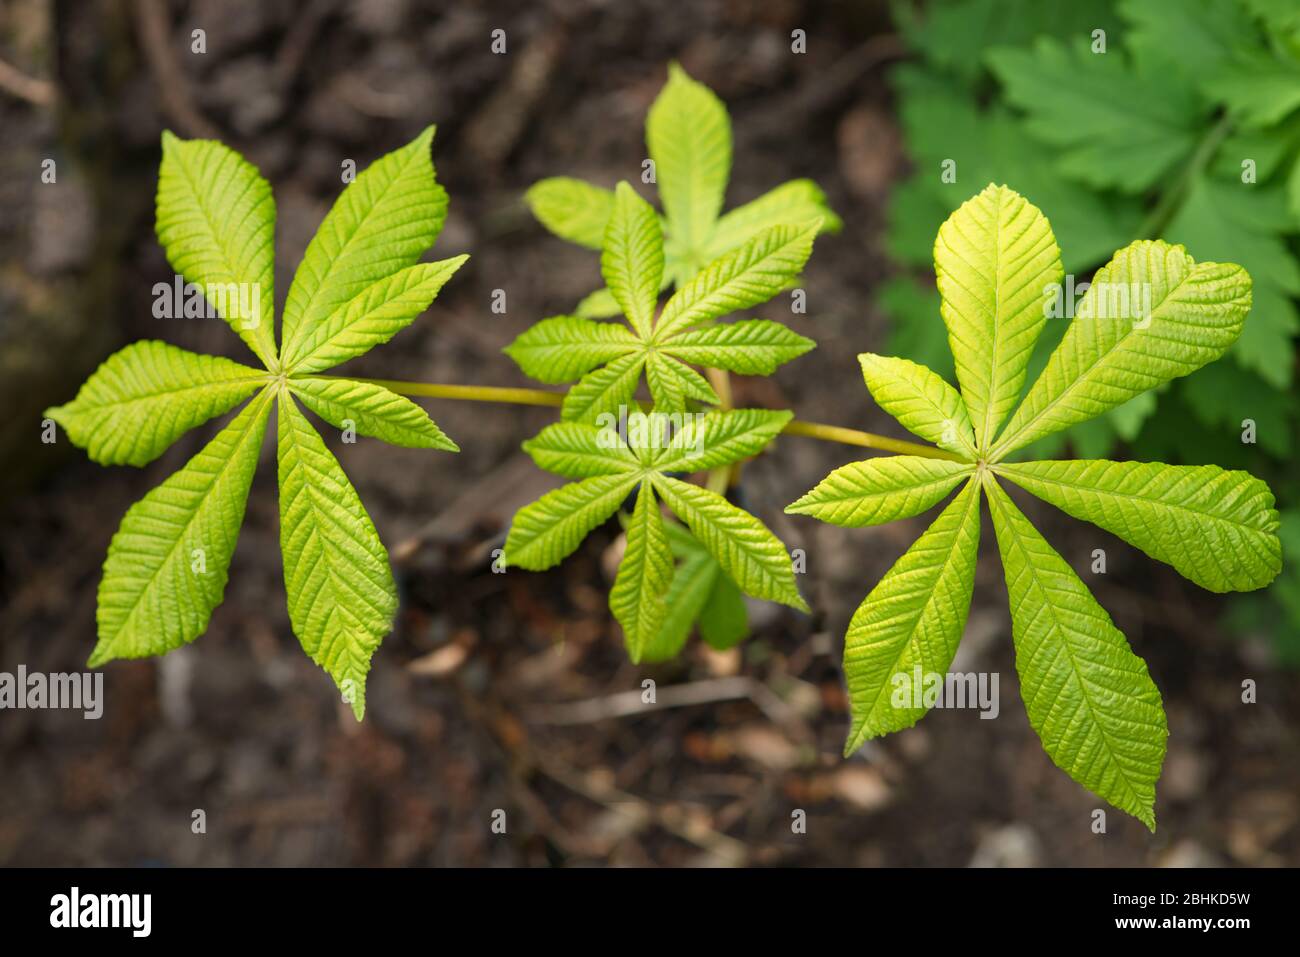 Leaves of a Horse Chestnut tree Stock Photo